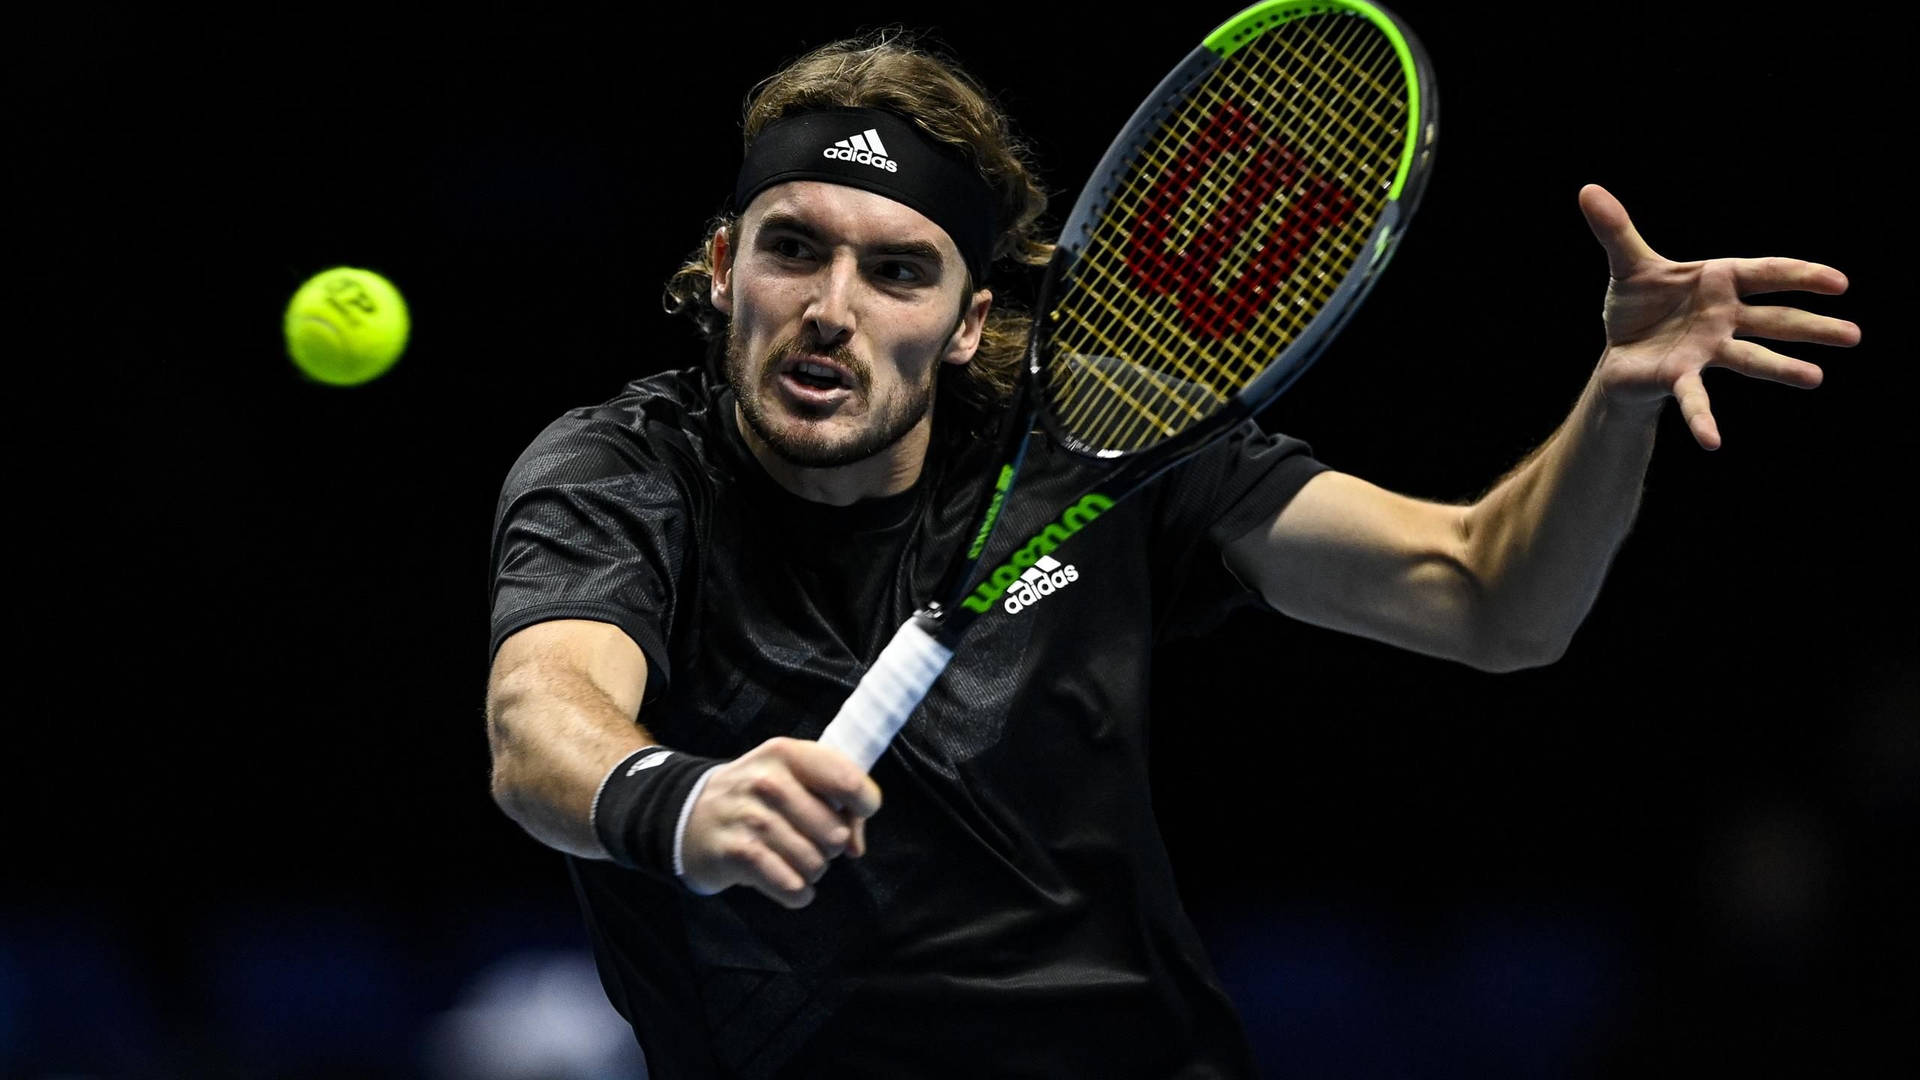 Stefanos Tsitsipas Action-packed Sports Photograph Background